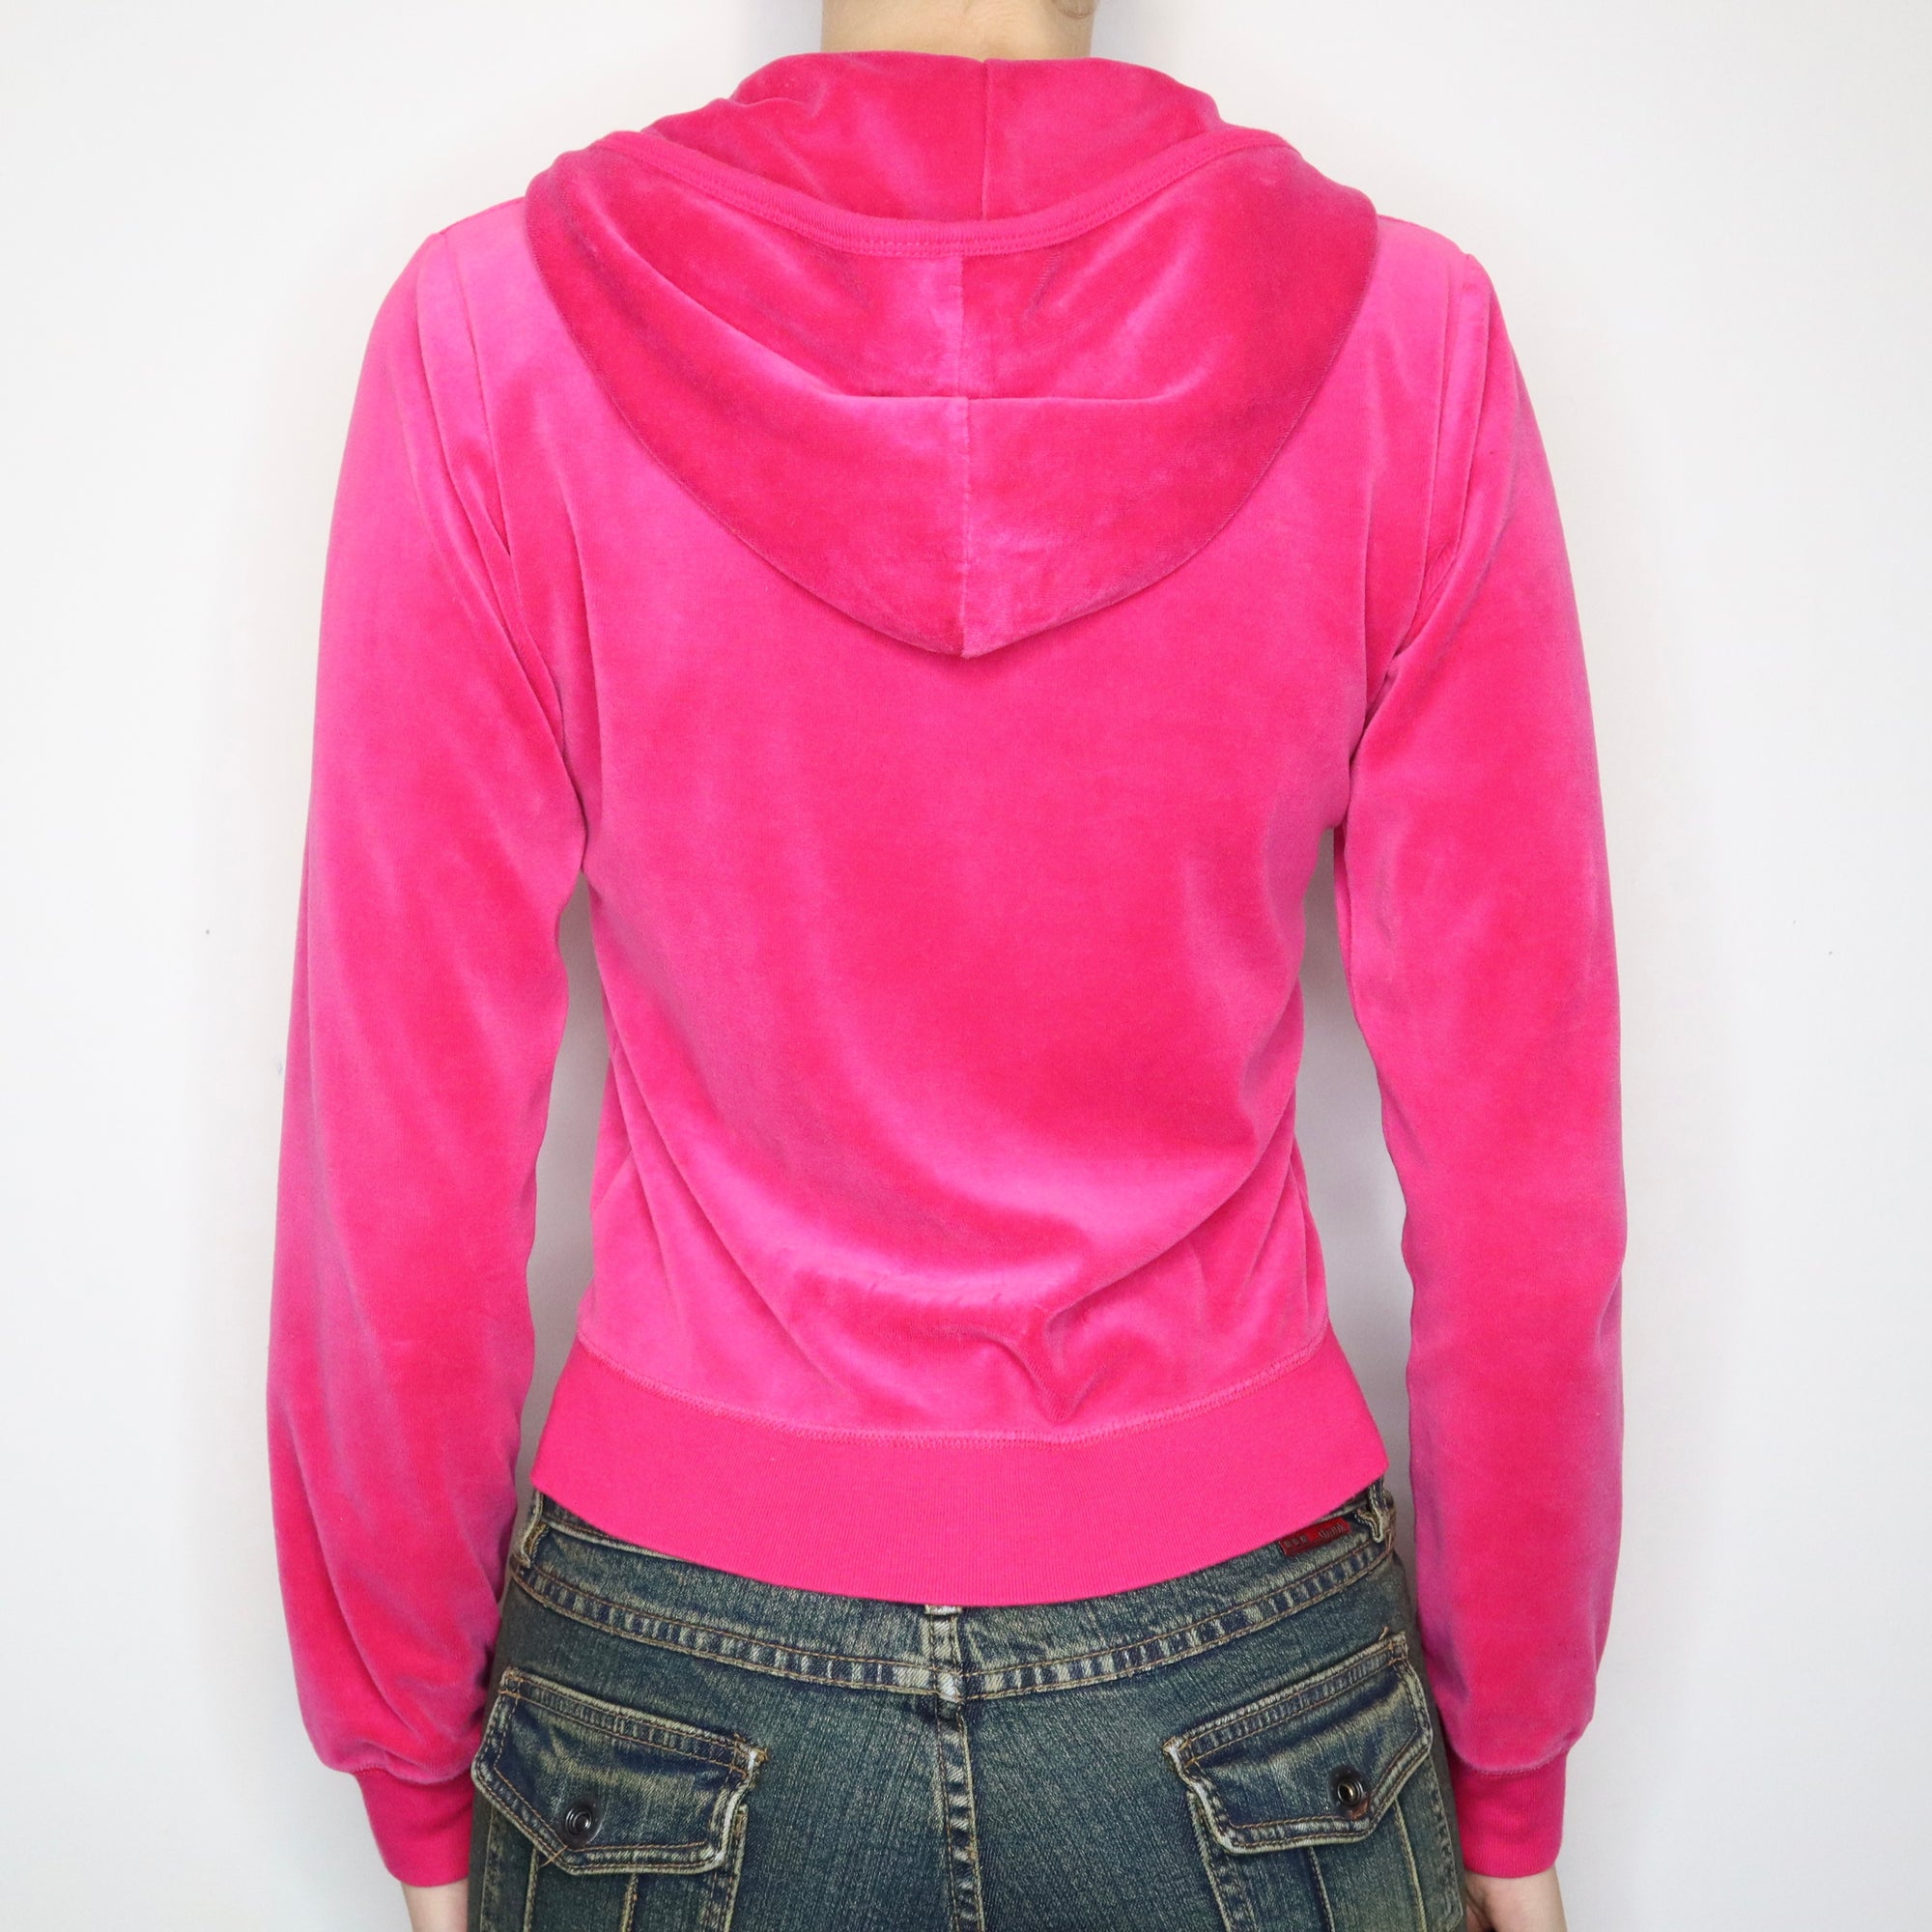 Vintage Early 2000s Juicy Couture Hot Pink Velour Hoodie